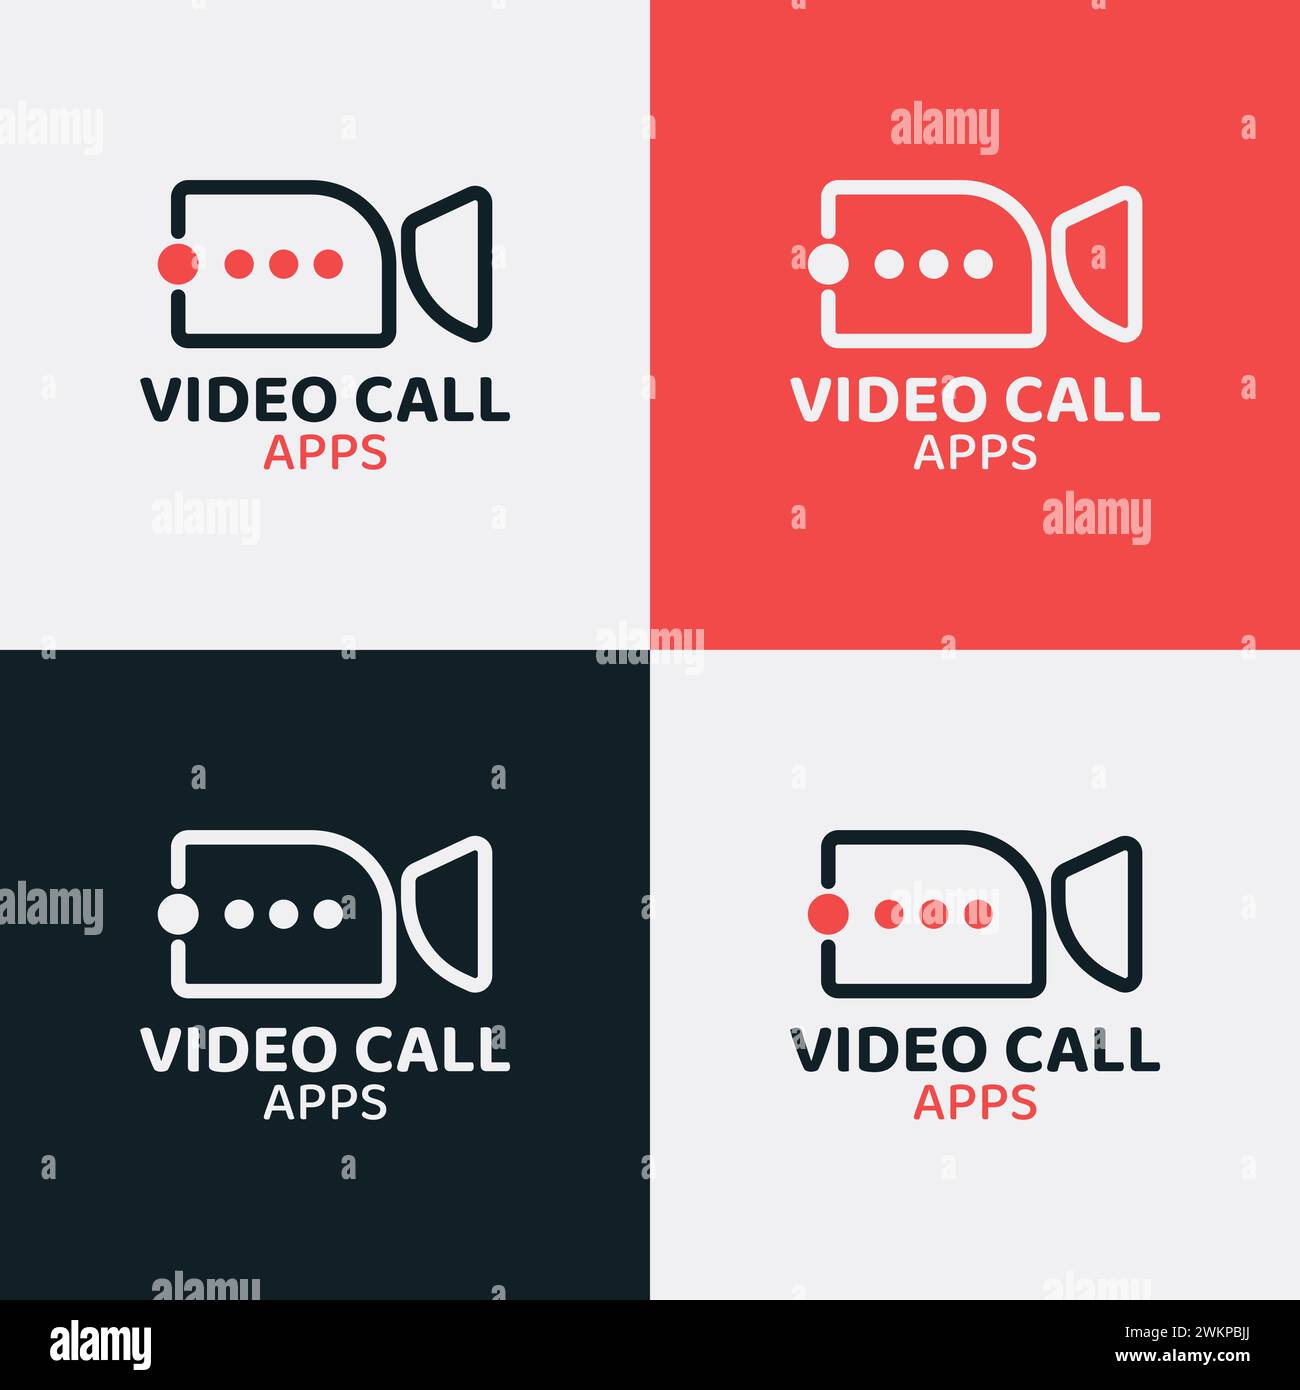 Video chat app logo with line style. Stock Vector